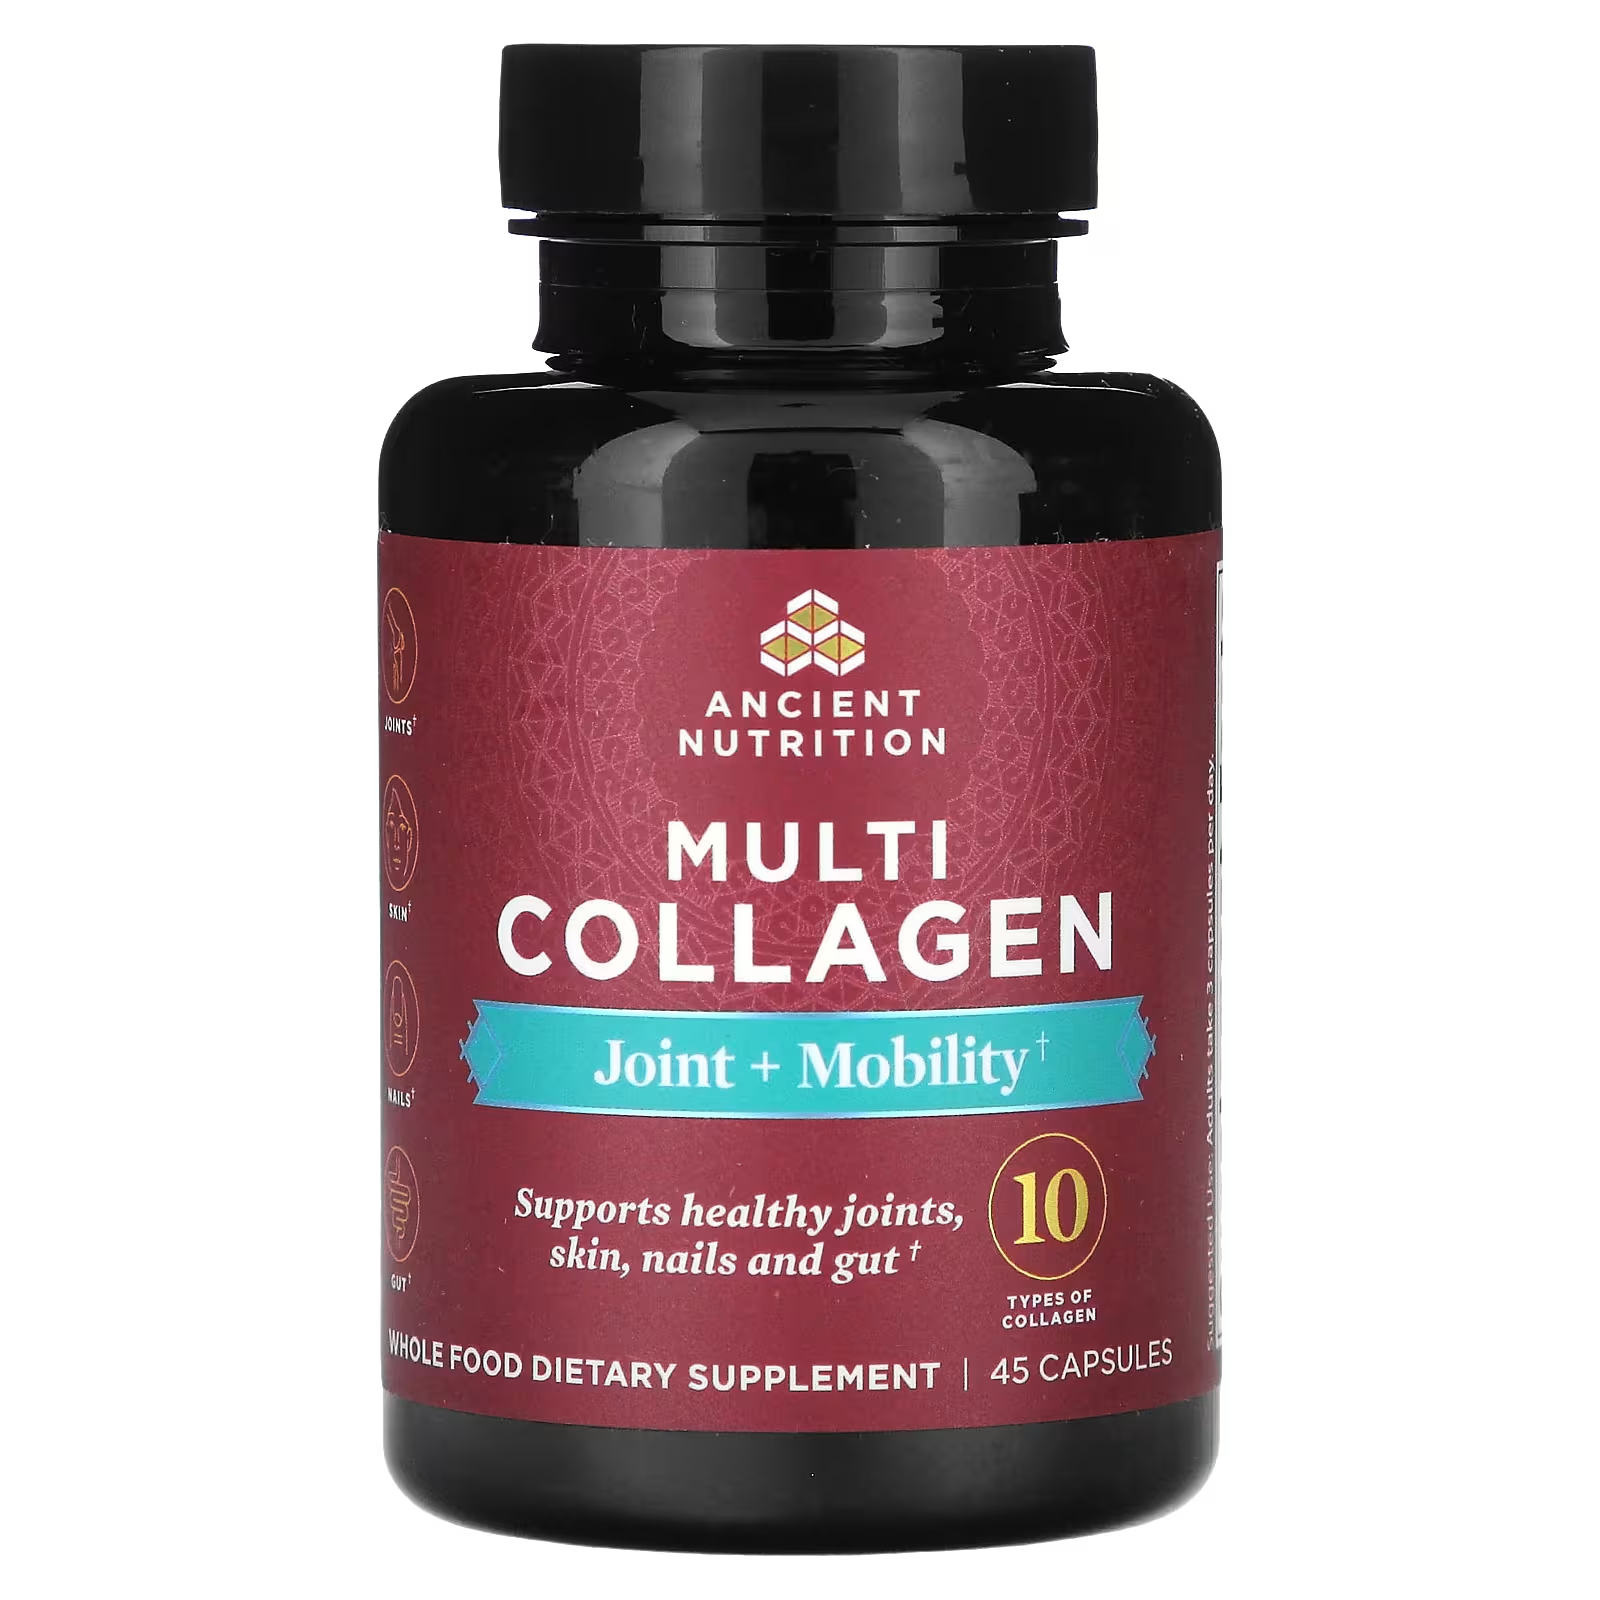 Пищевая добавка Ancient Nutrition Multi Collagen Joint + Mobility, 45 капсул